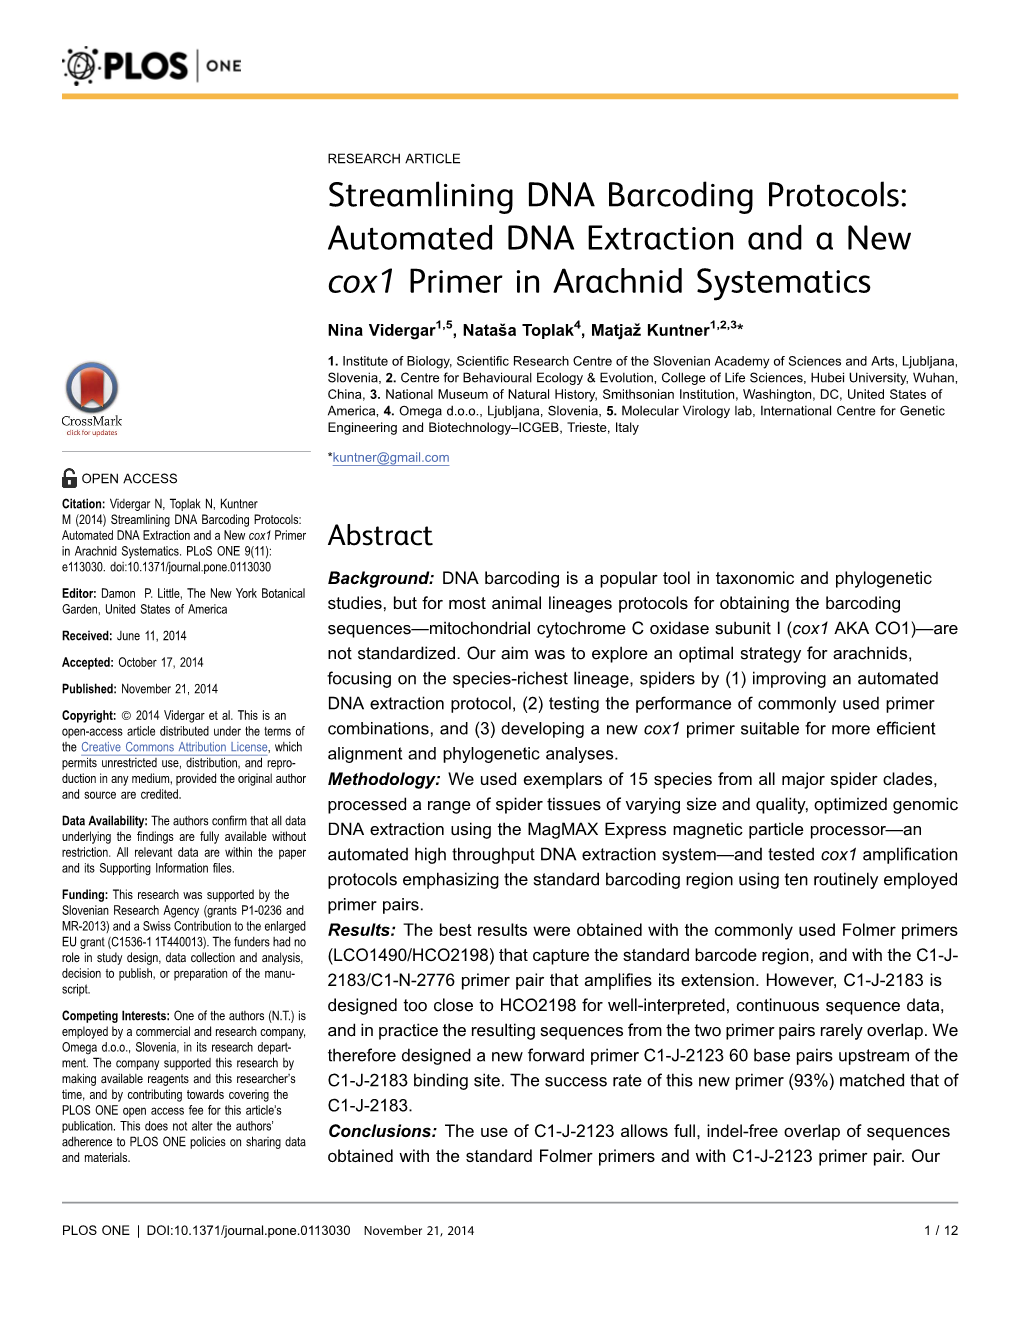 Automated DNA Extraction and a New Cox1 Primer in Arachnid Systematics